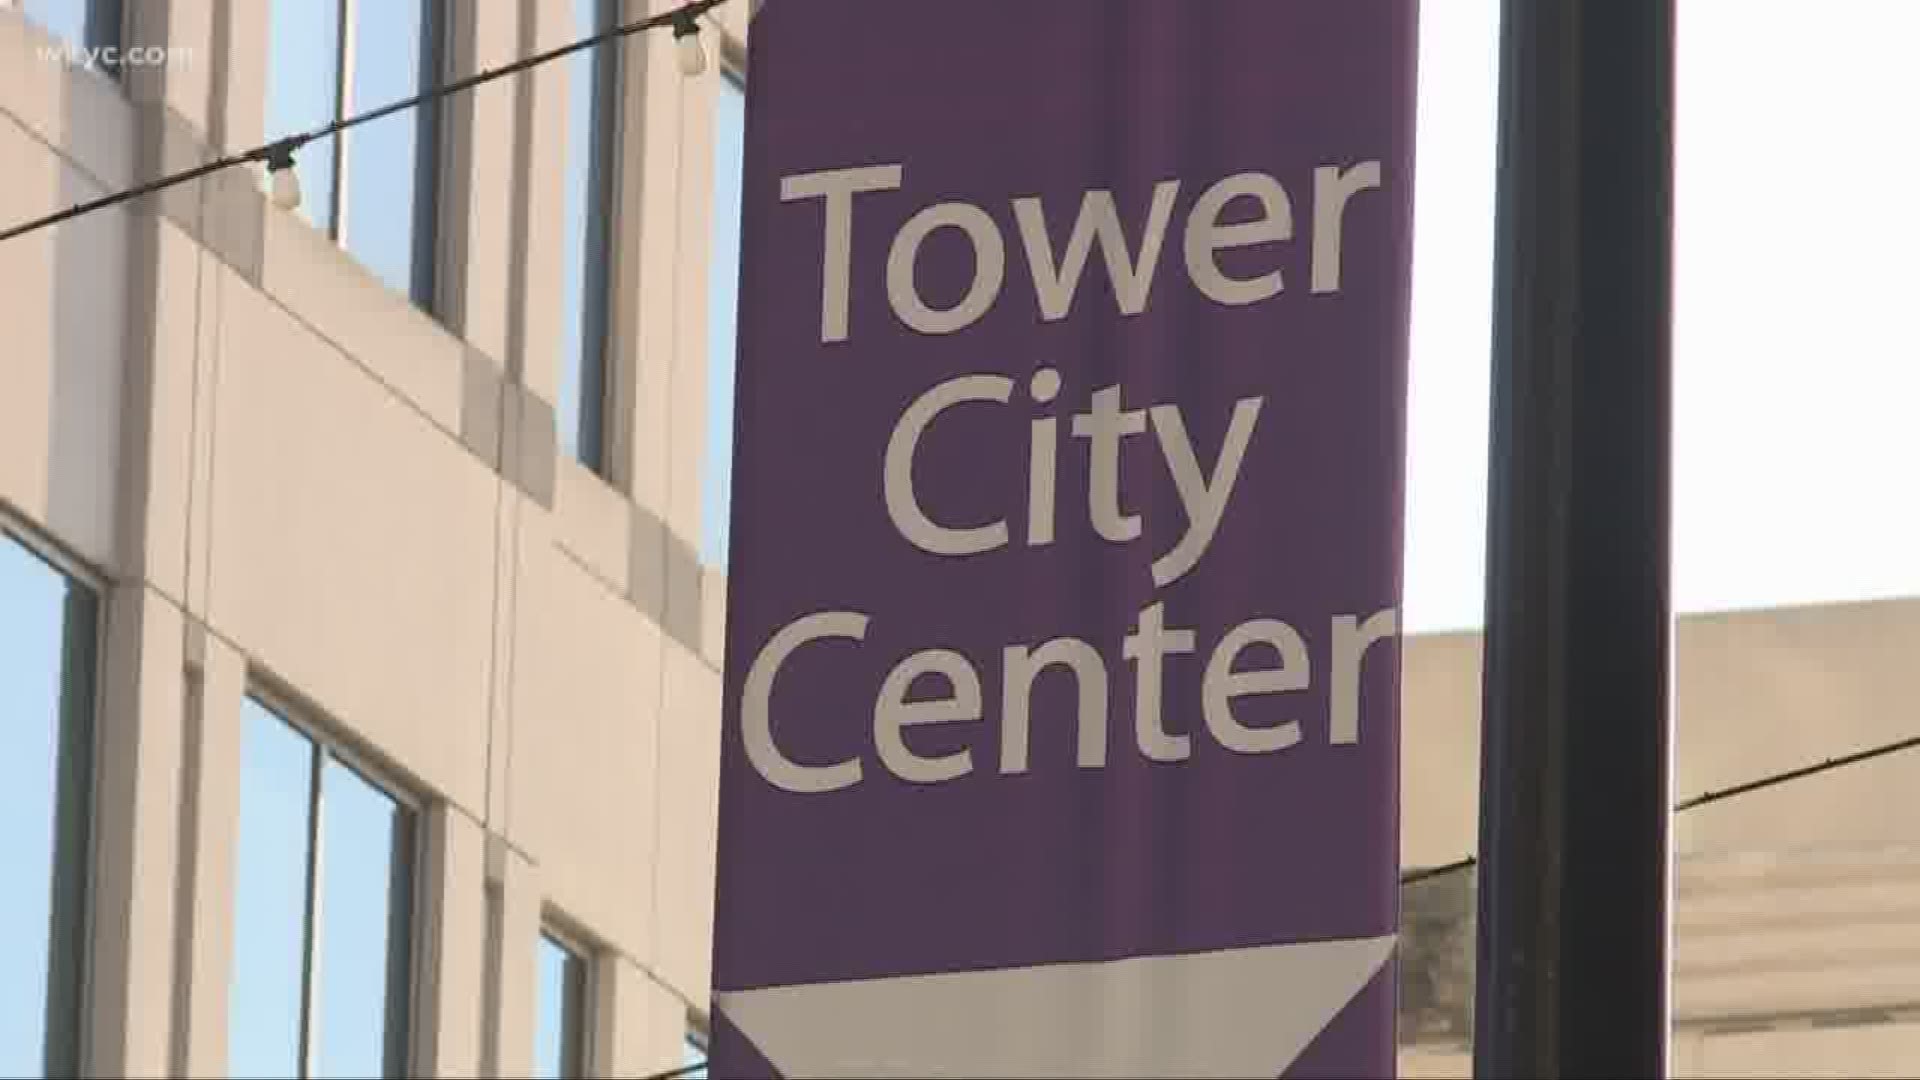 Tower city could soon see new life